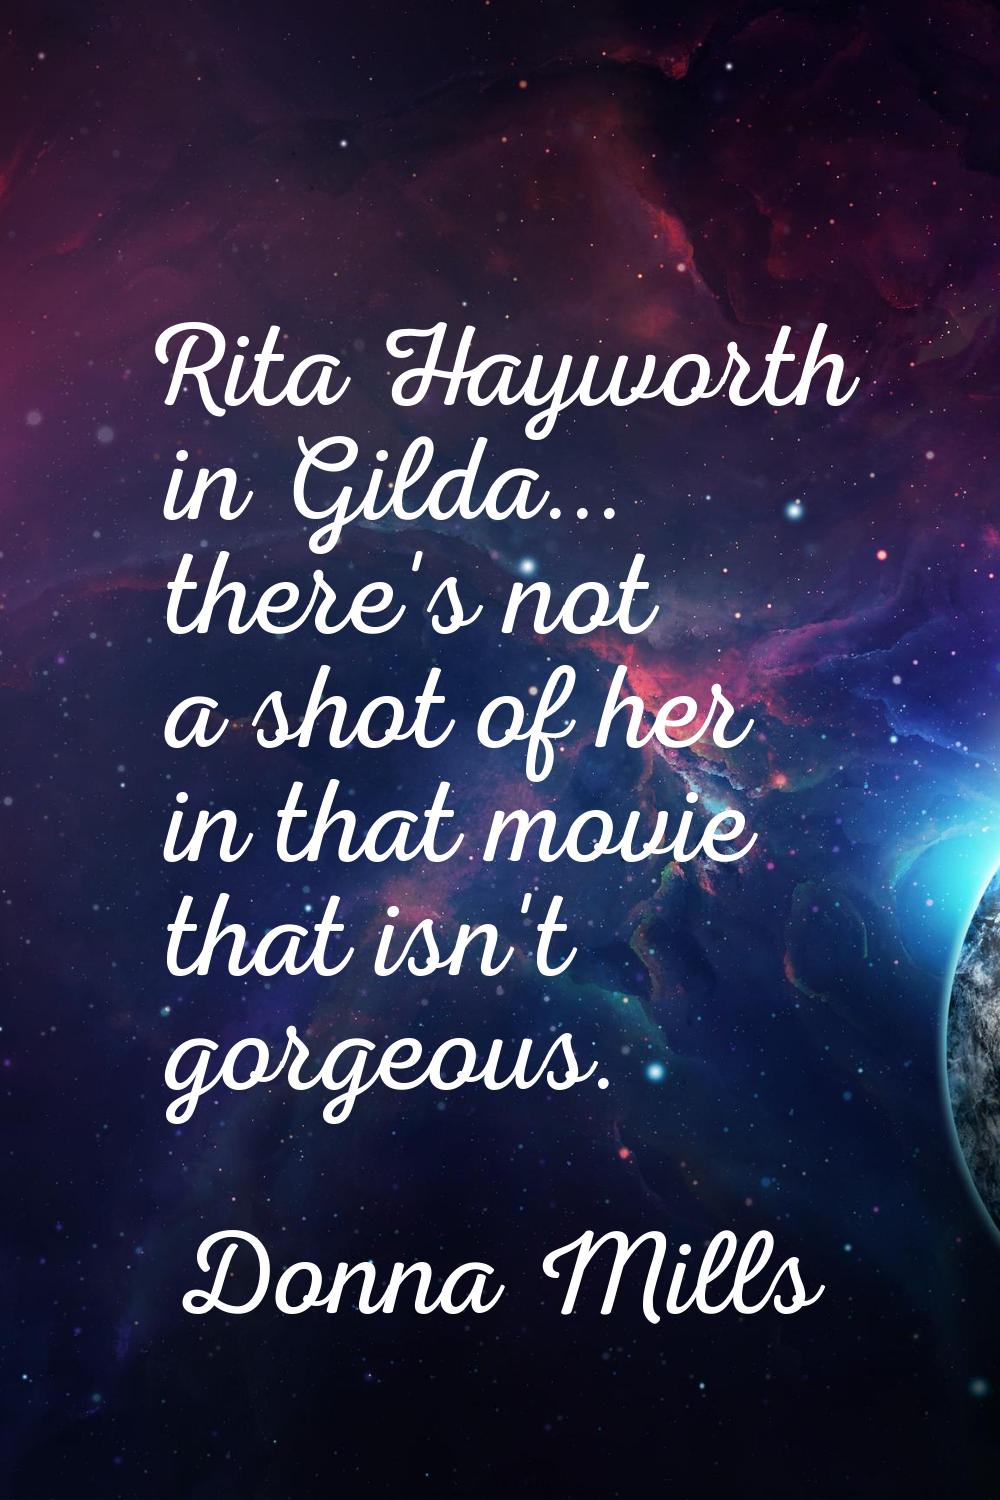 Rita Hayworth in Gilda... there's not a shot of her in that movie that isn't gorgeous.